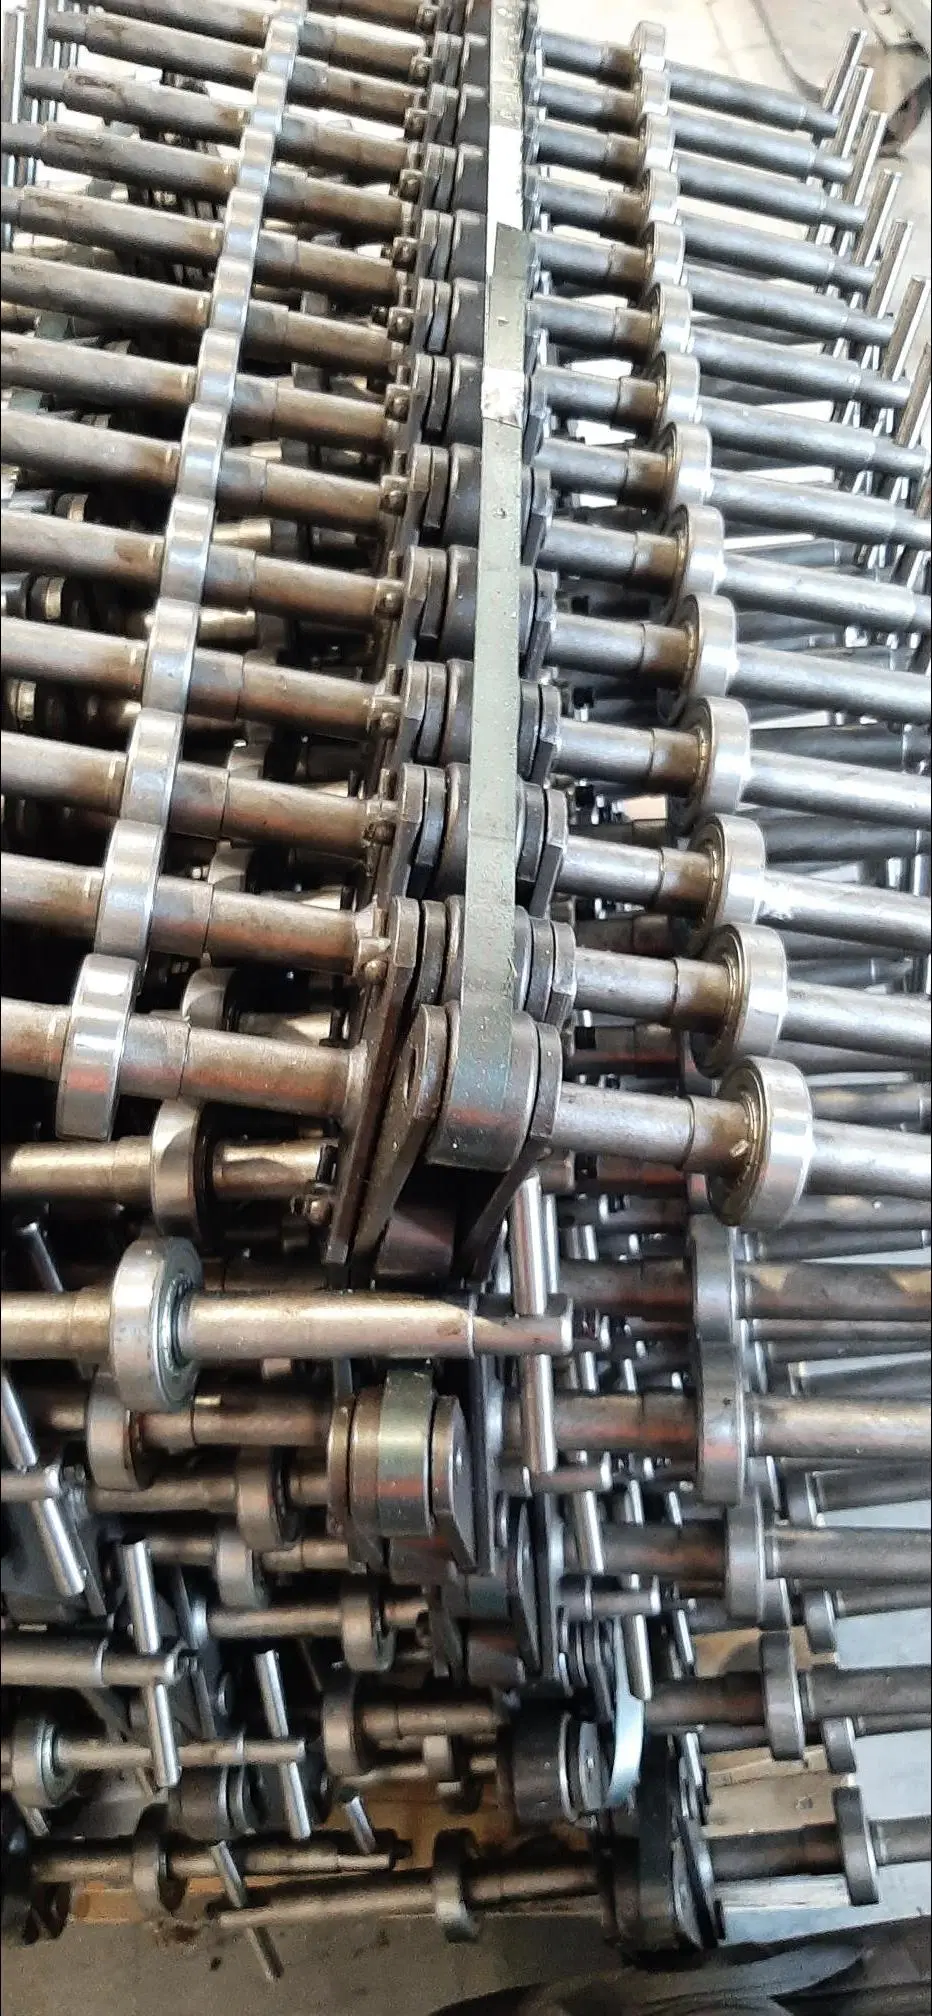 Engineering Palm Oil Conveyor Roller Chain with Screw Pin